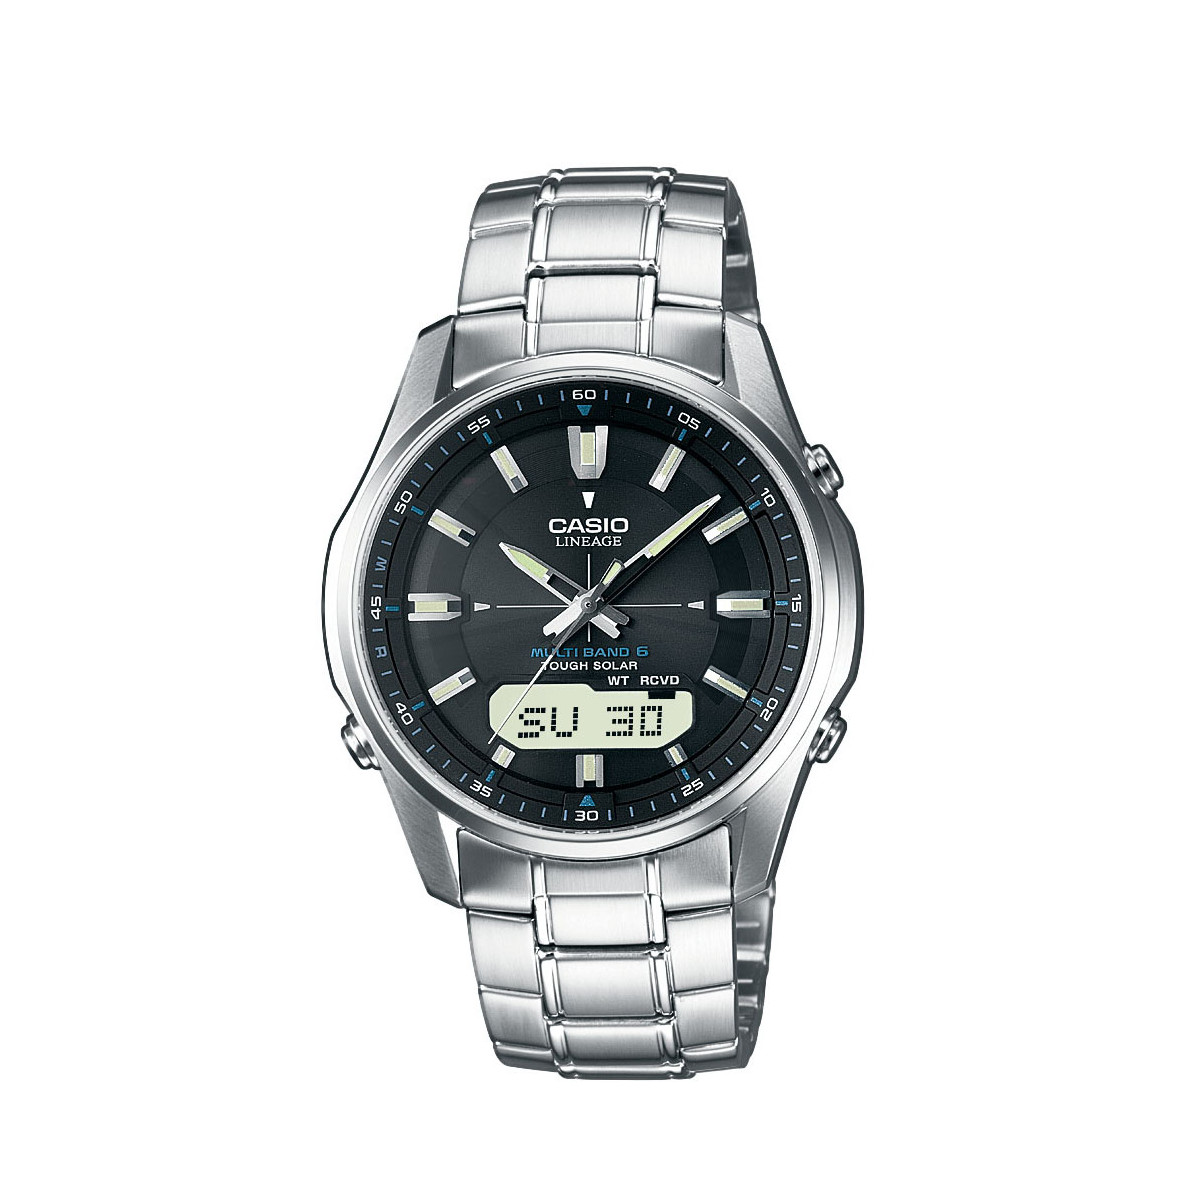 Montre homme casio collection - LCW-M100DSE-1AER